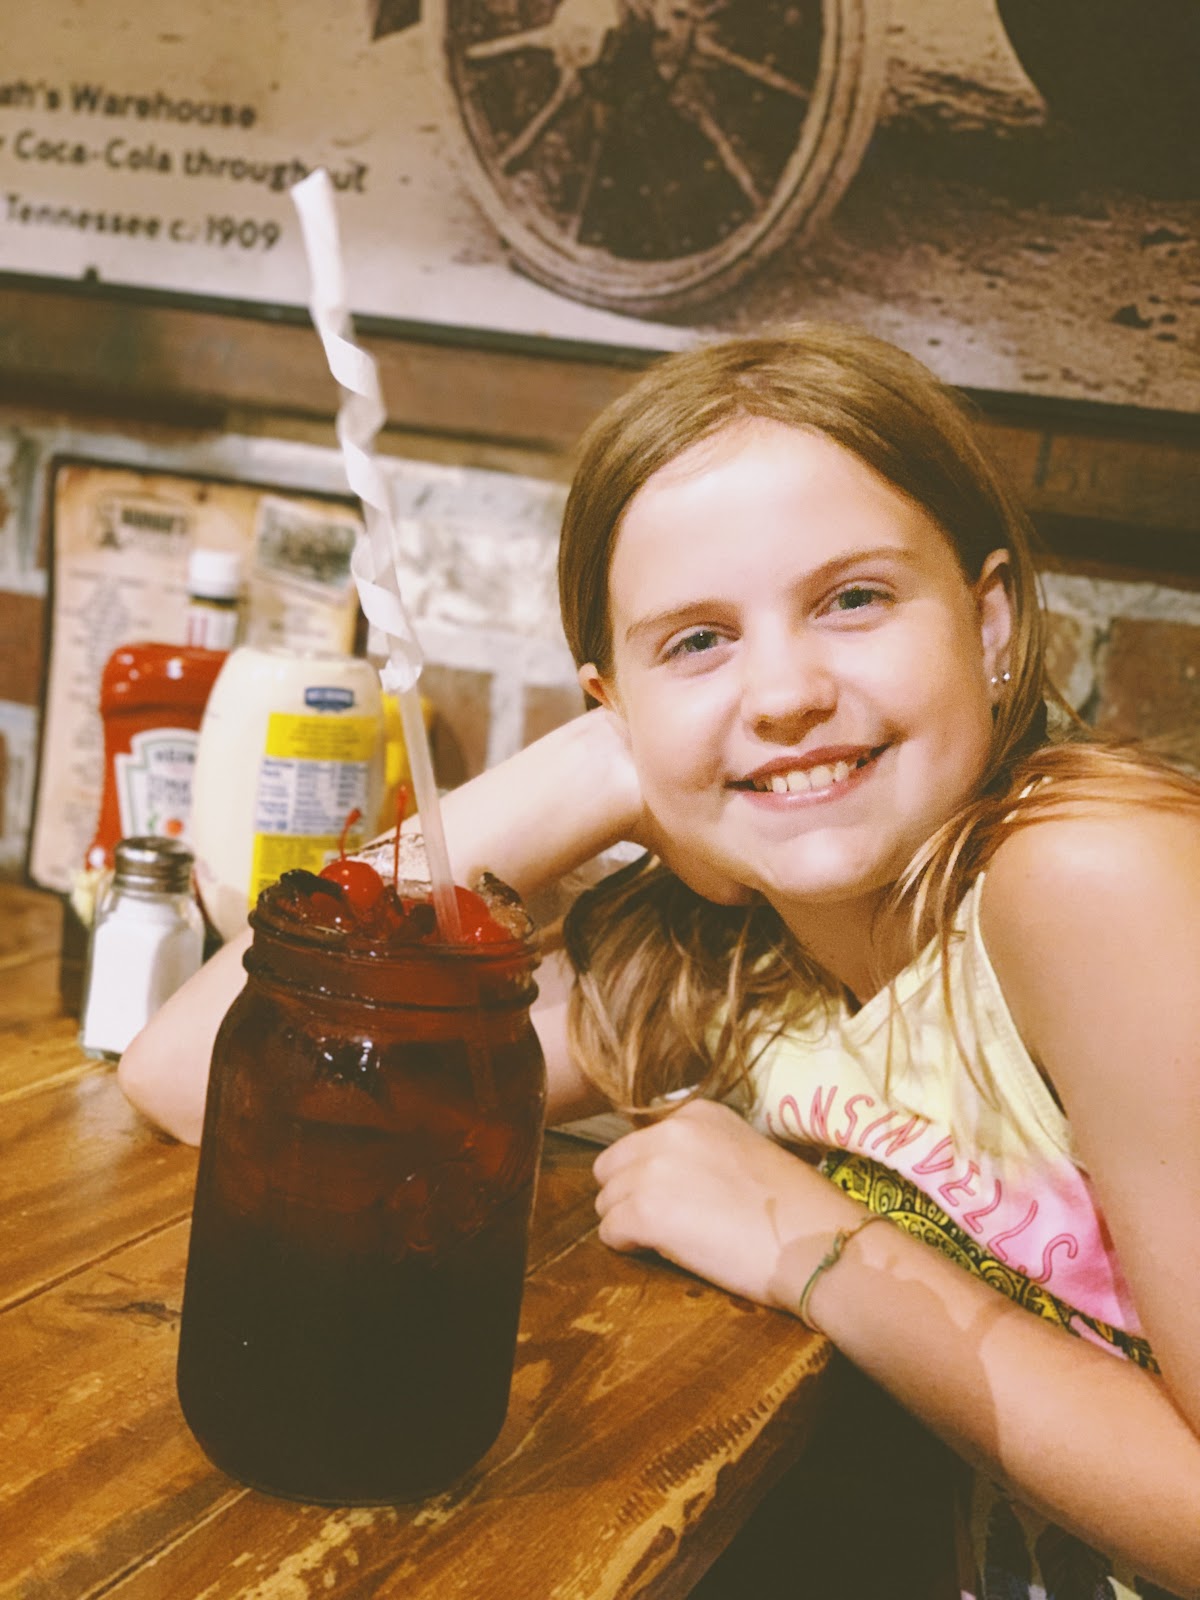 These are the best family friendly restaurants to try out in Pigeon Forge!